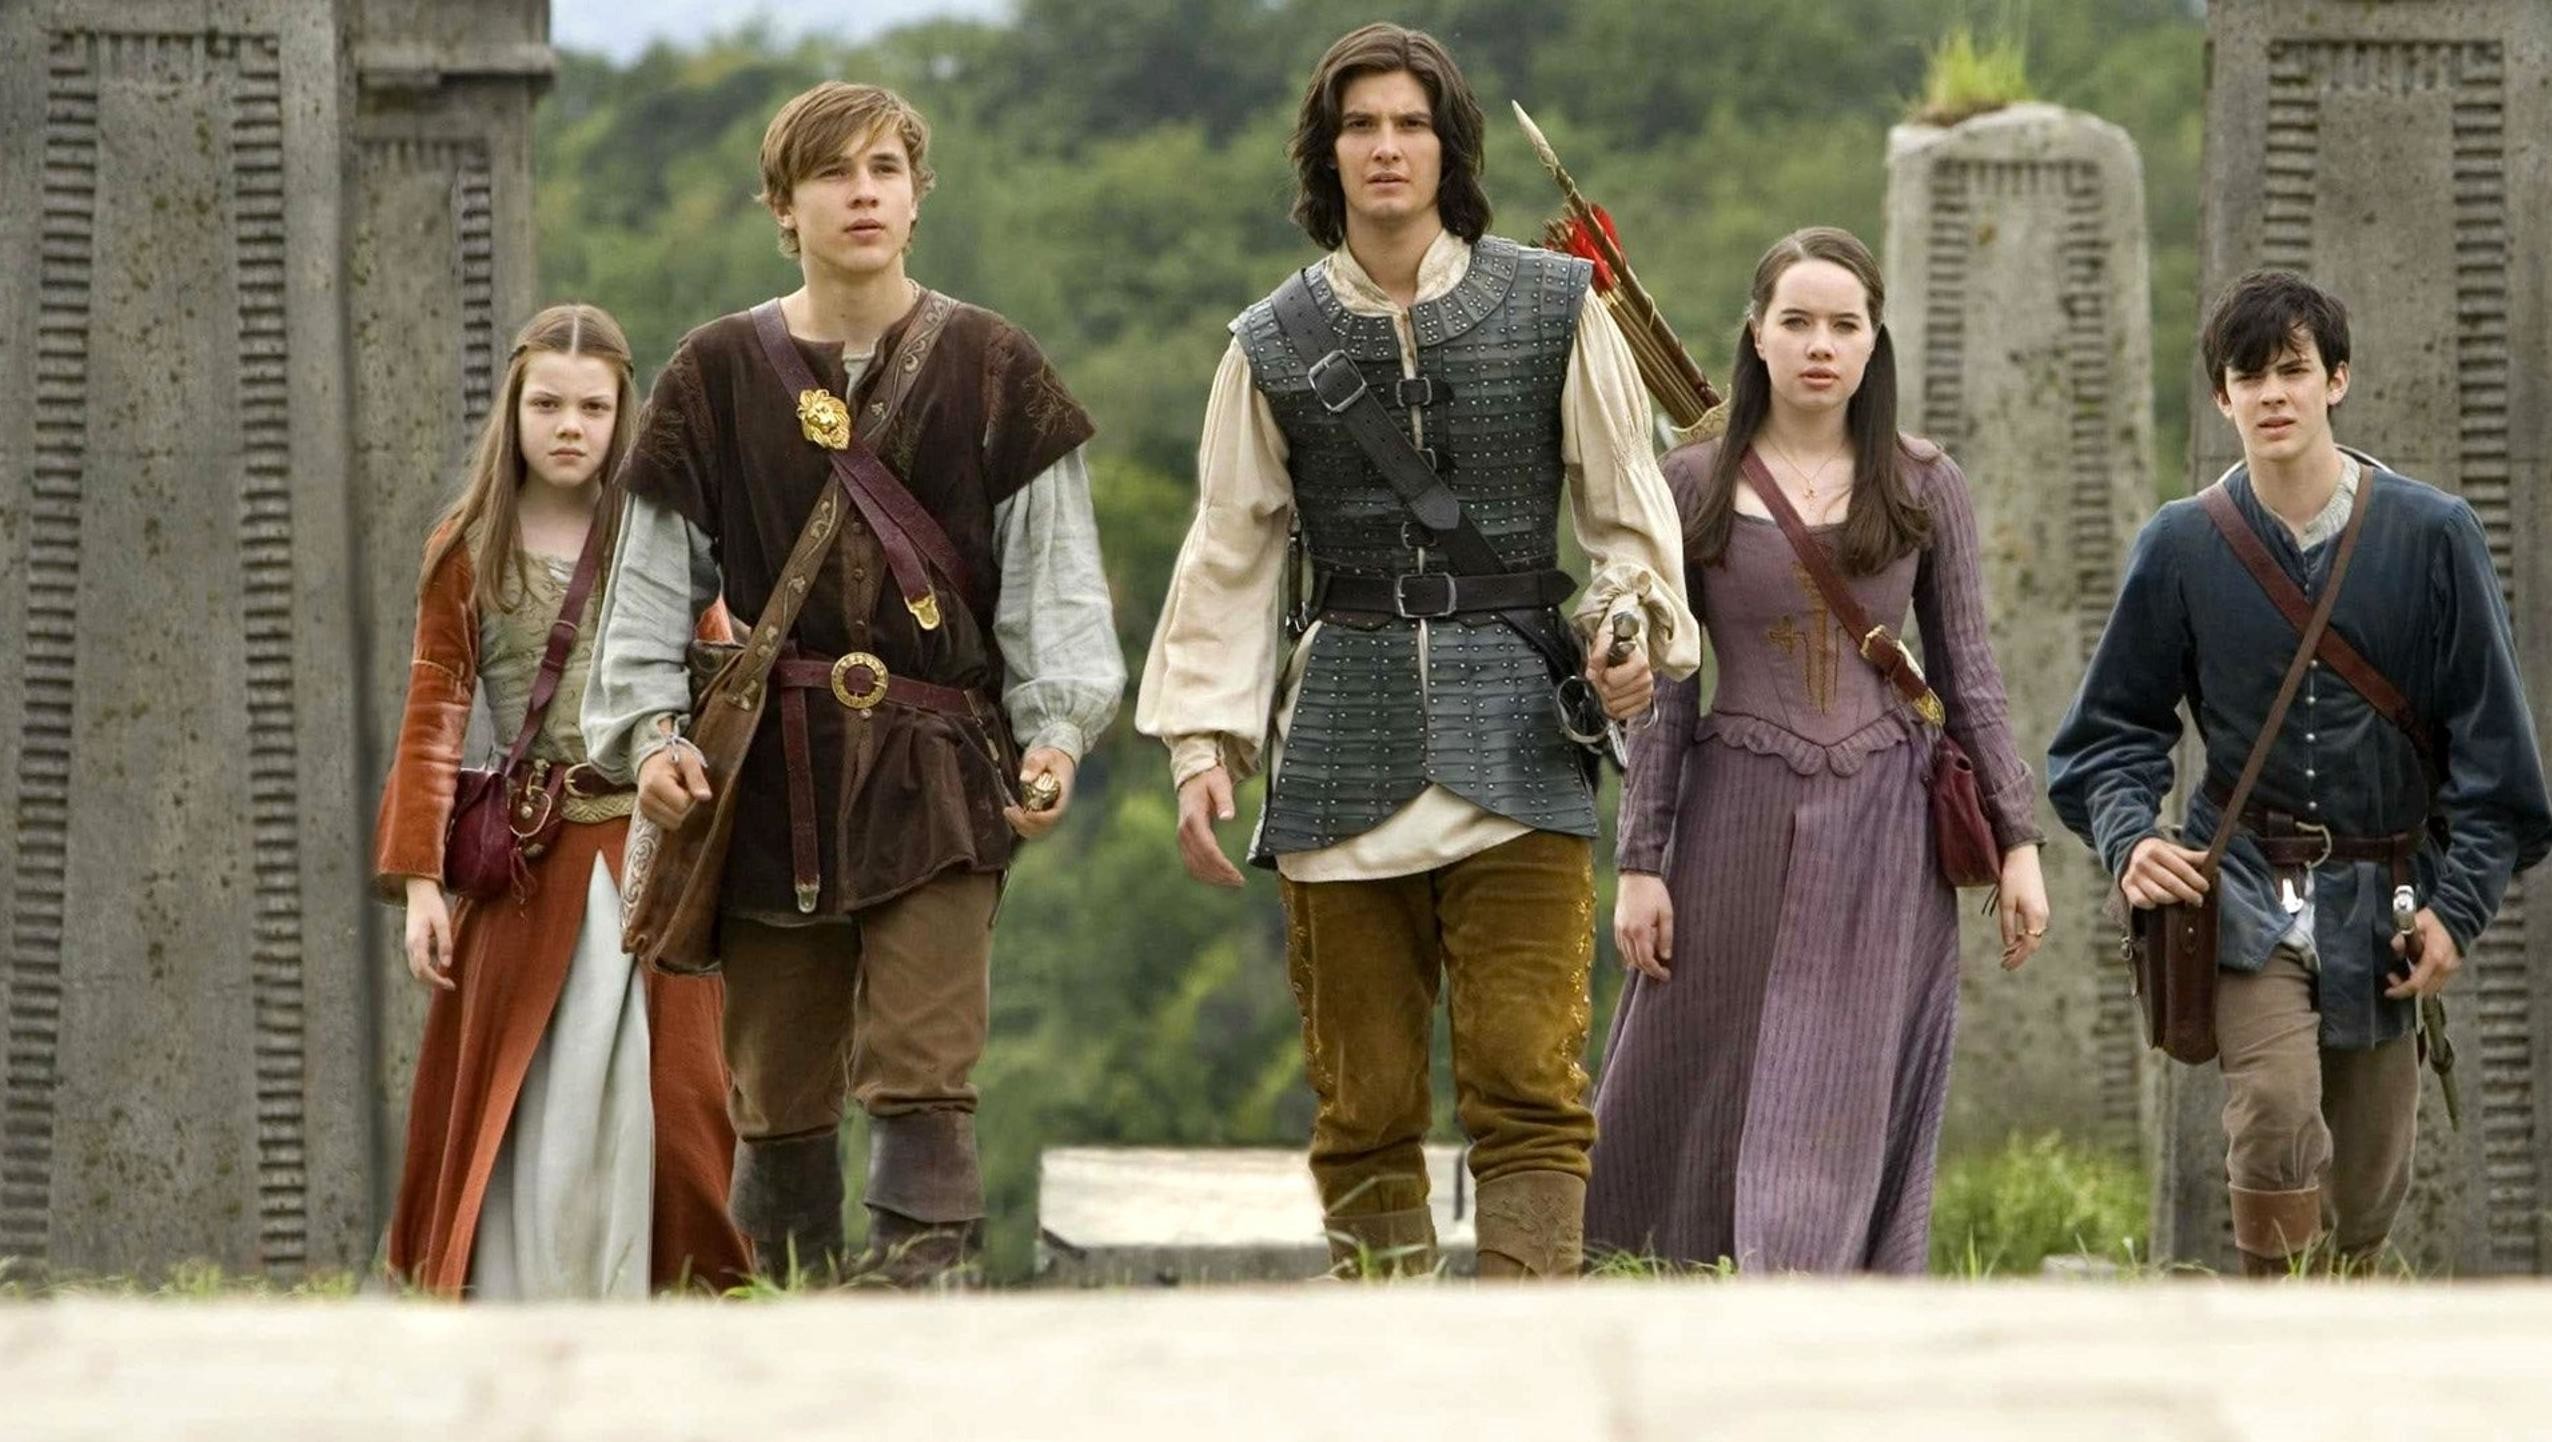 2552x1442 Wallpaper for "The Chronicles of Narnia: Prince Caspian" ...